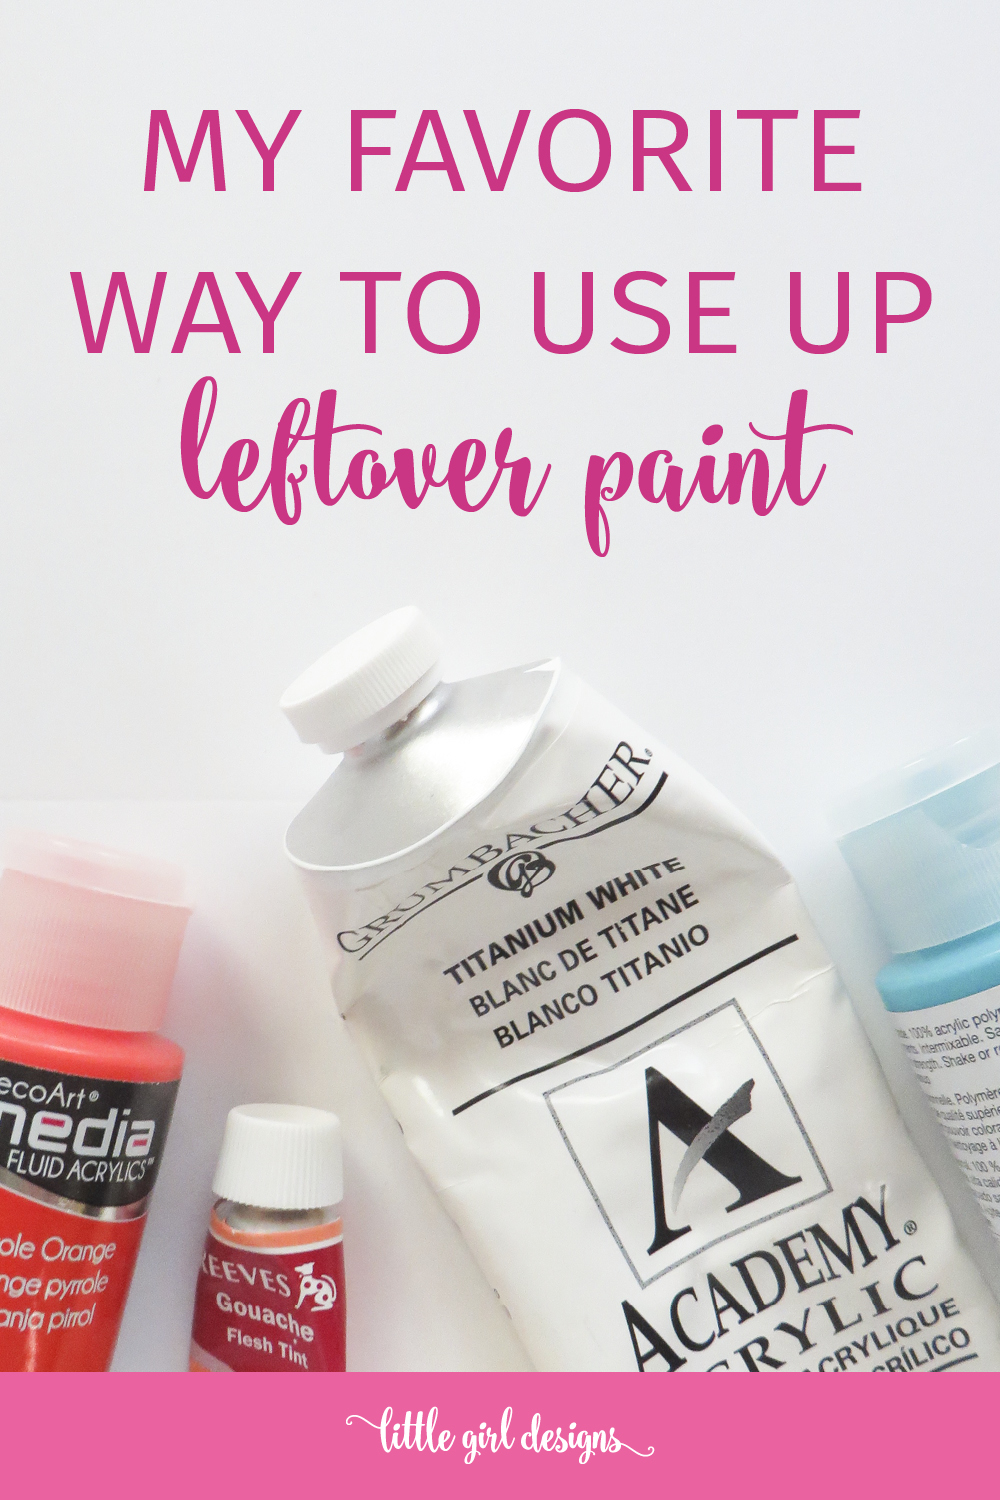 Have leftover paint? Here are a few of my favorite ways to use it up!